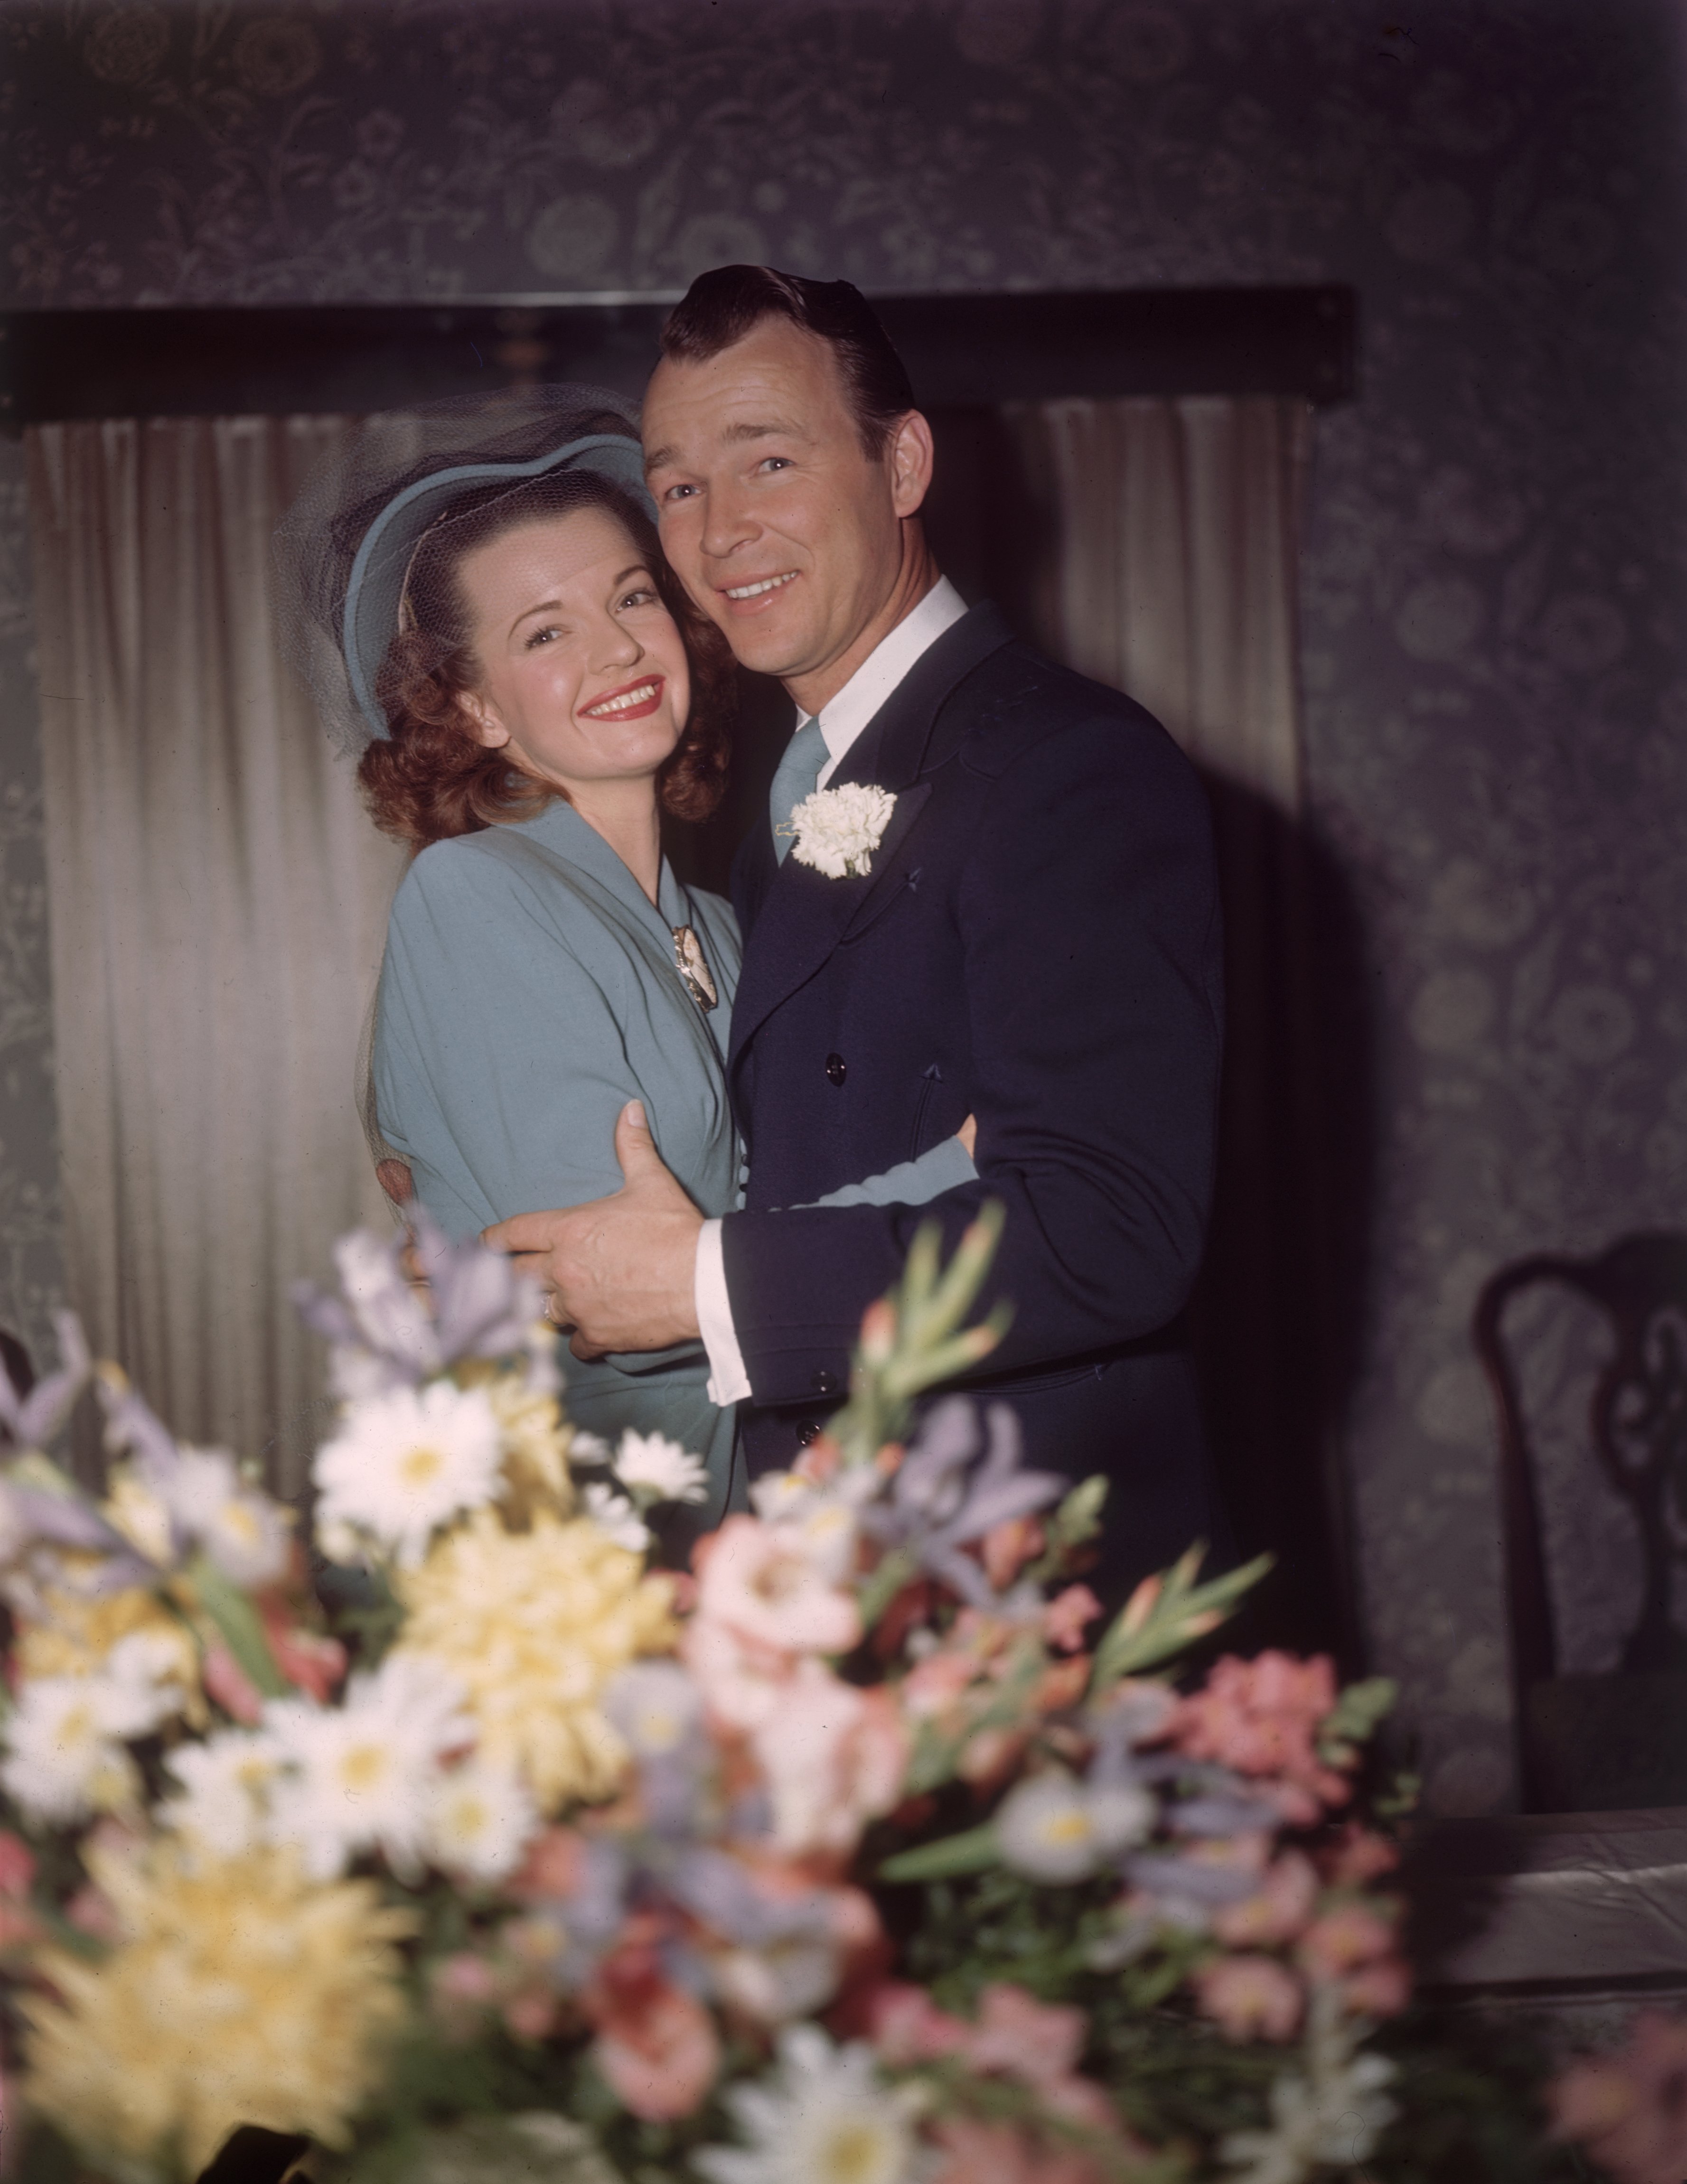 Roy Rogers and Dale Evans embracing on their wedding day. | Source: Getty Images